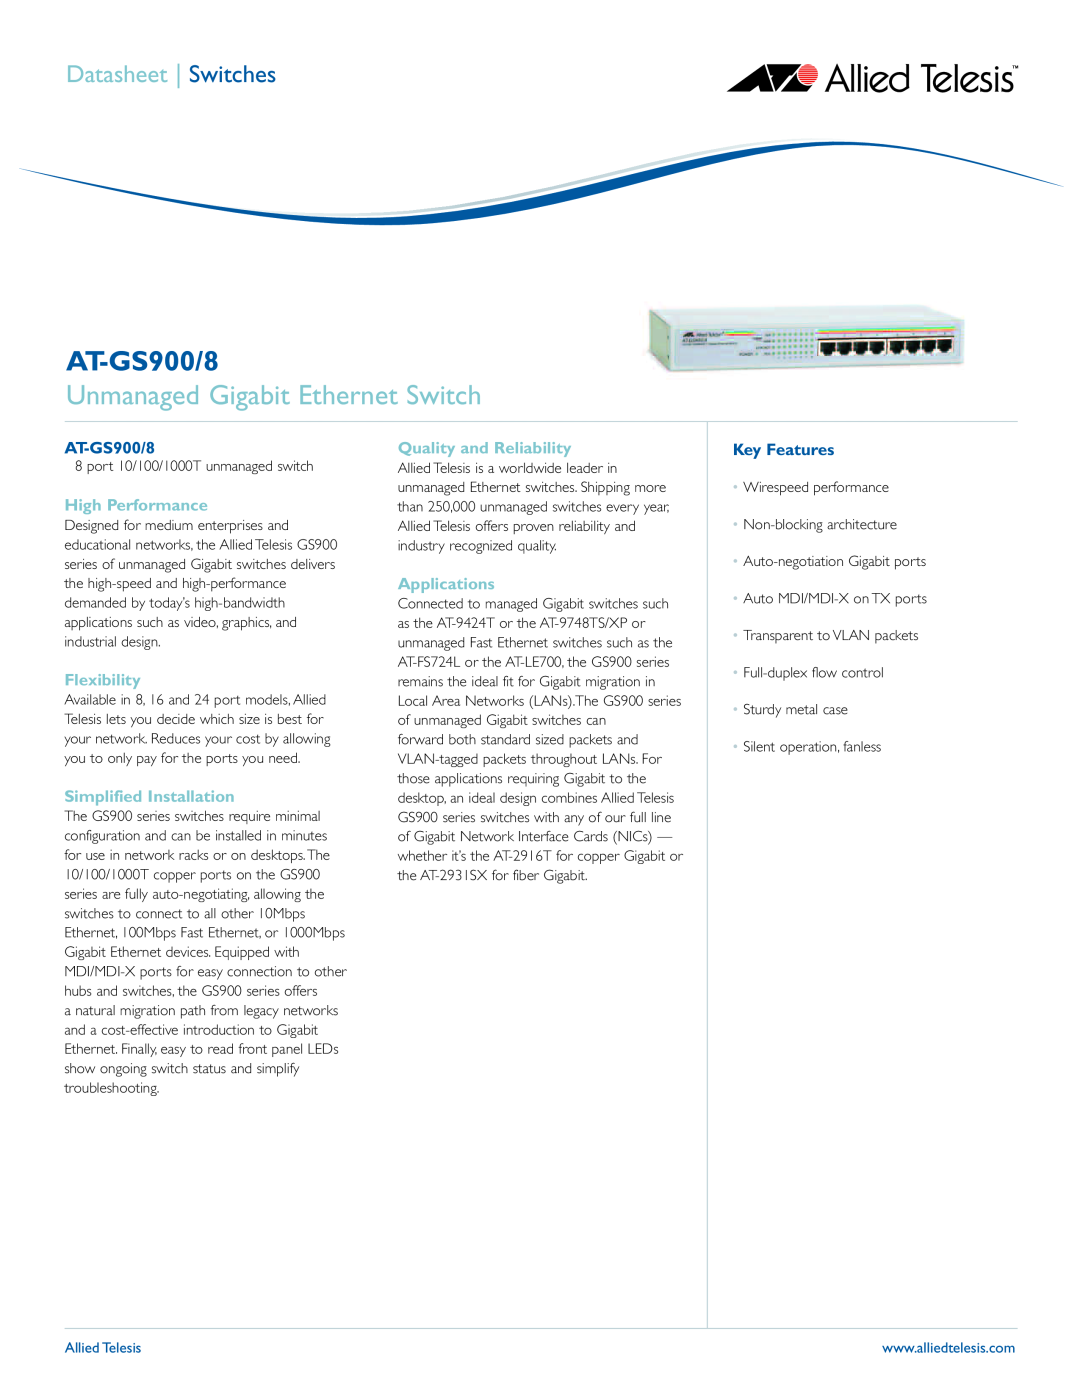 Allied Telesis AT-GS900/8 manual Unmanaged Gigabit Ethernet Switch, High Performance, Flexibility, Simplified Installation 